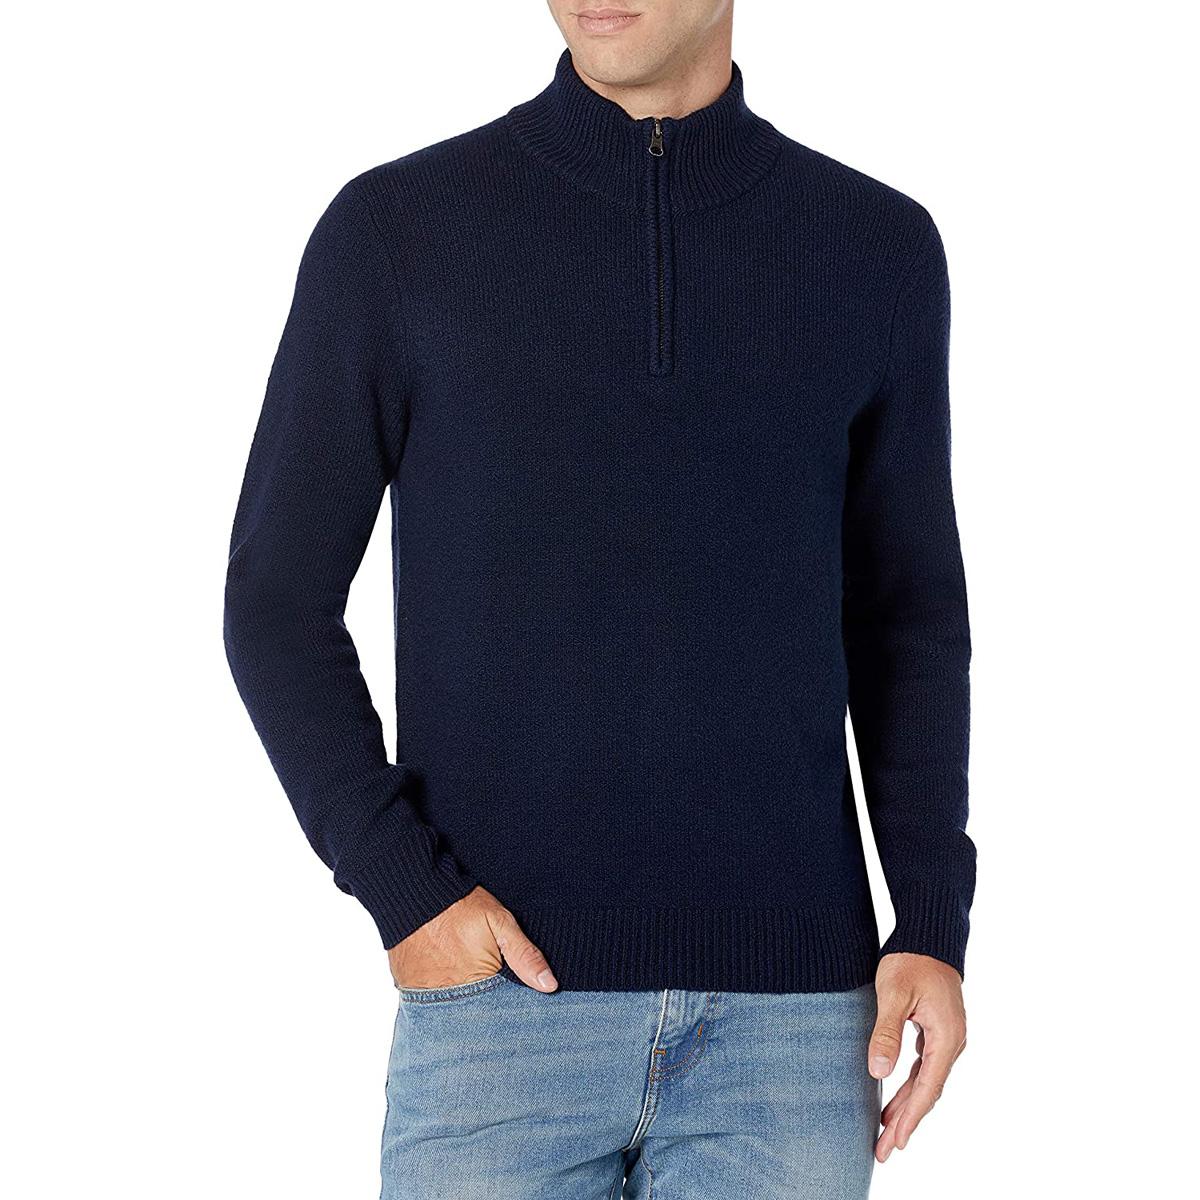 Amazon Essentials Long-Sleeve Soft Touch Quarter-Zip Sweater for $16.40